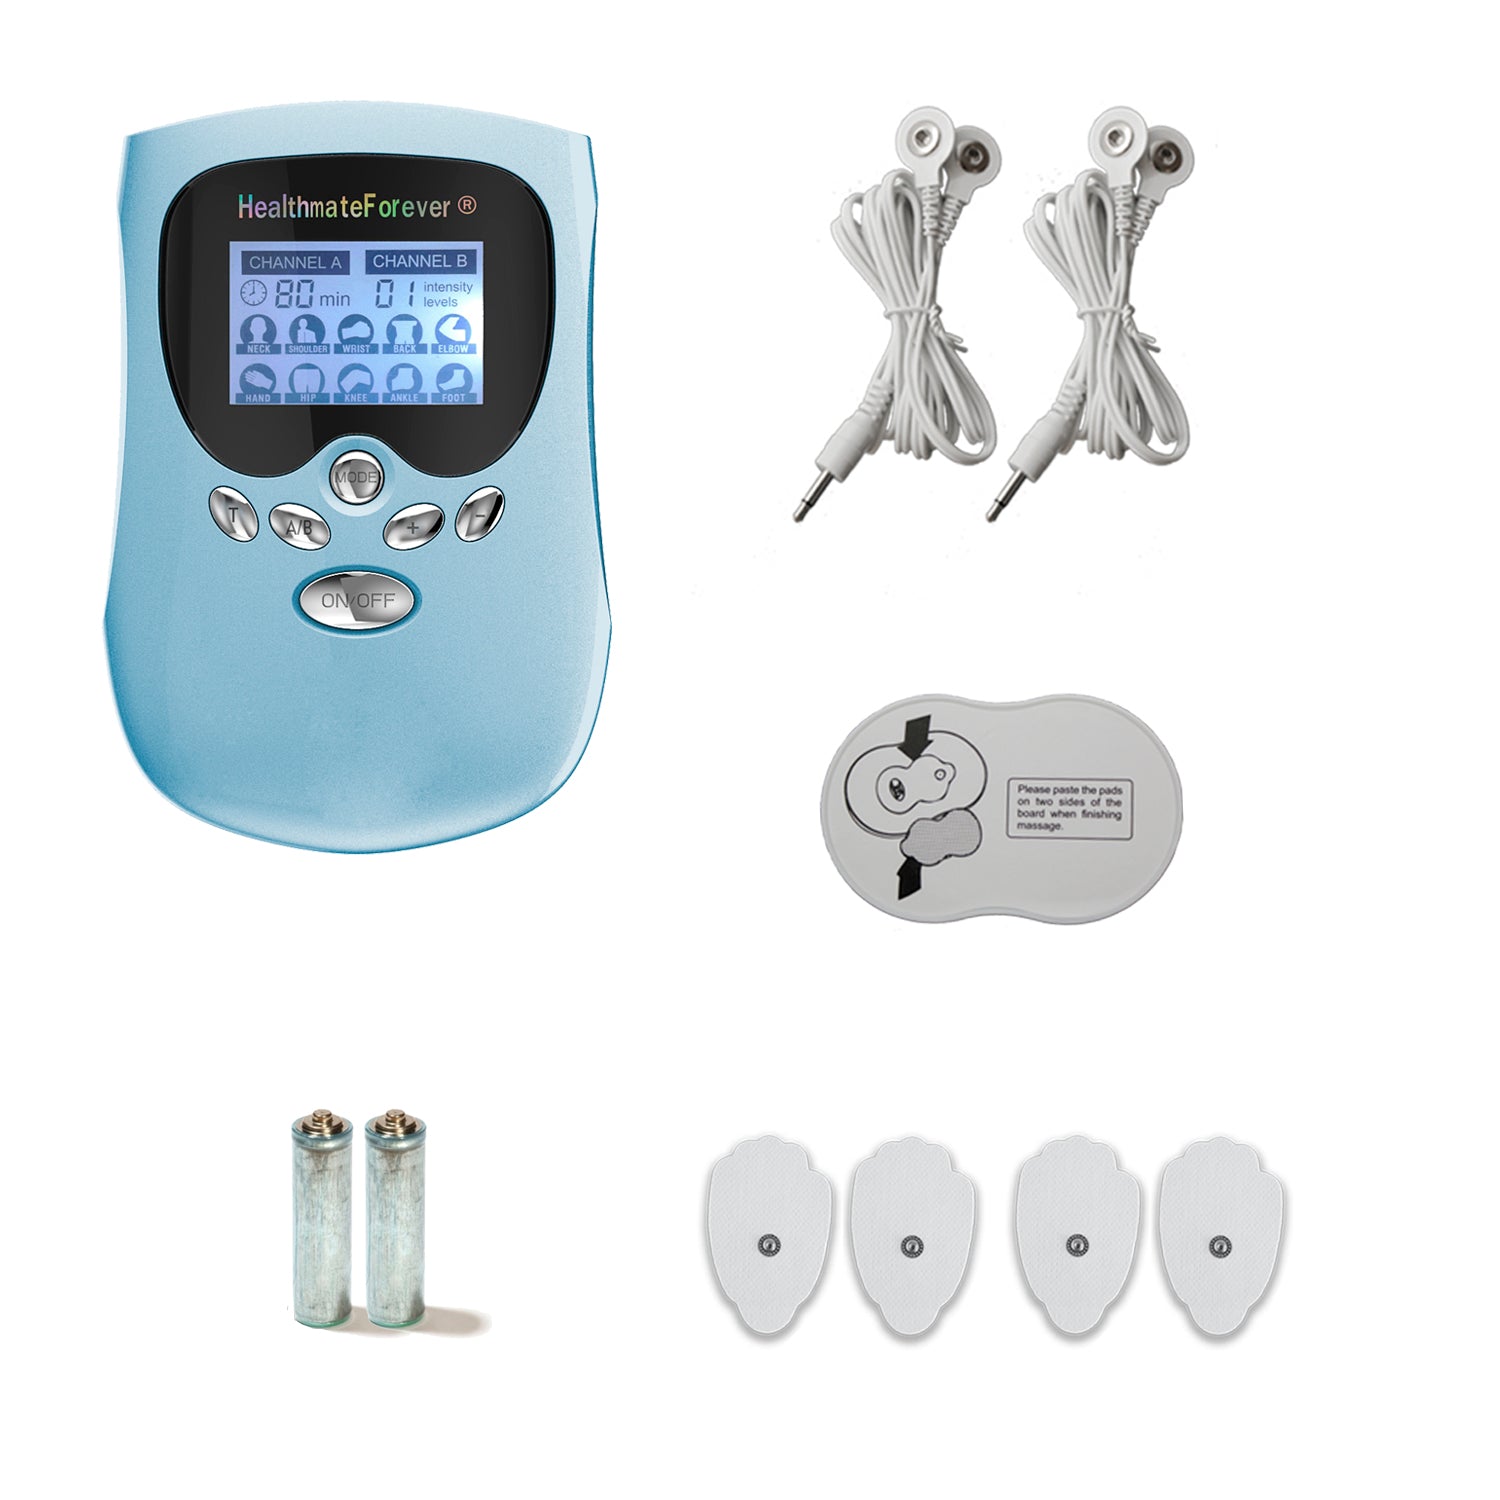 TENS 16 Pads Massage Unit Muscle Stimulator, Full Body Electric Pulse  Acupuncture EMS Massager, Healthy Livin' Solutions